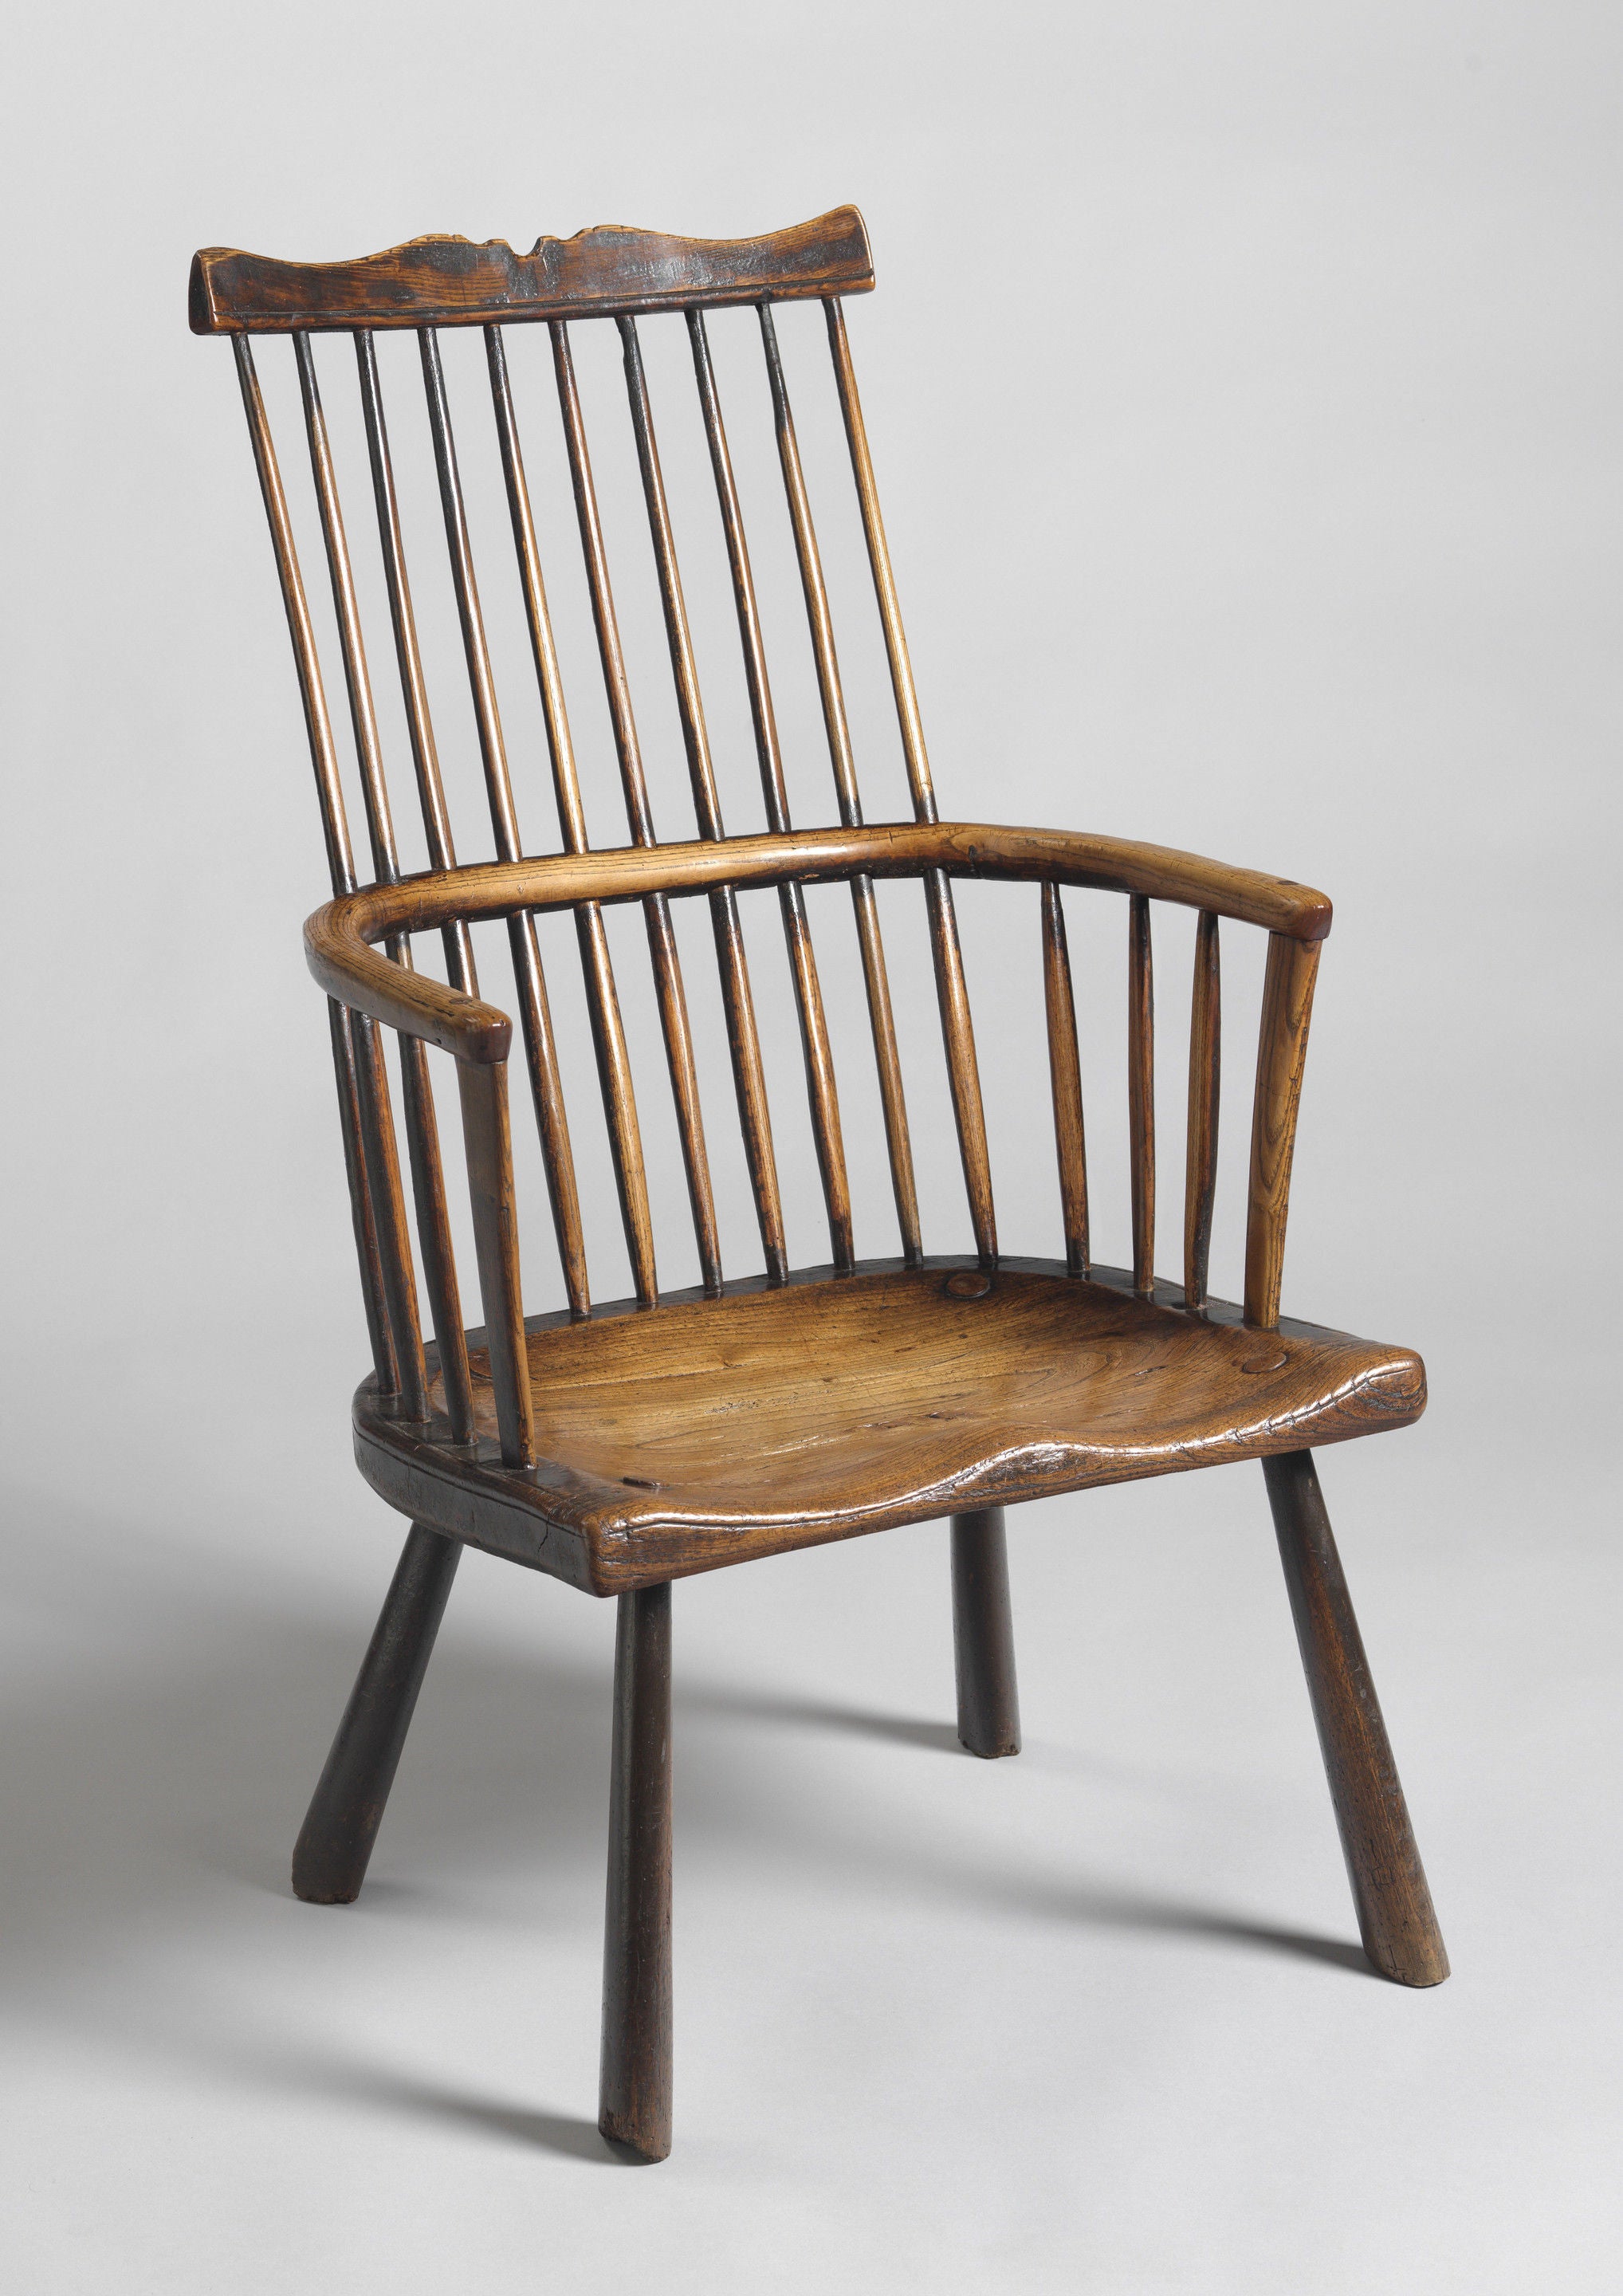 A Rare Early Comb Back Windsor Chair